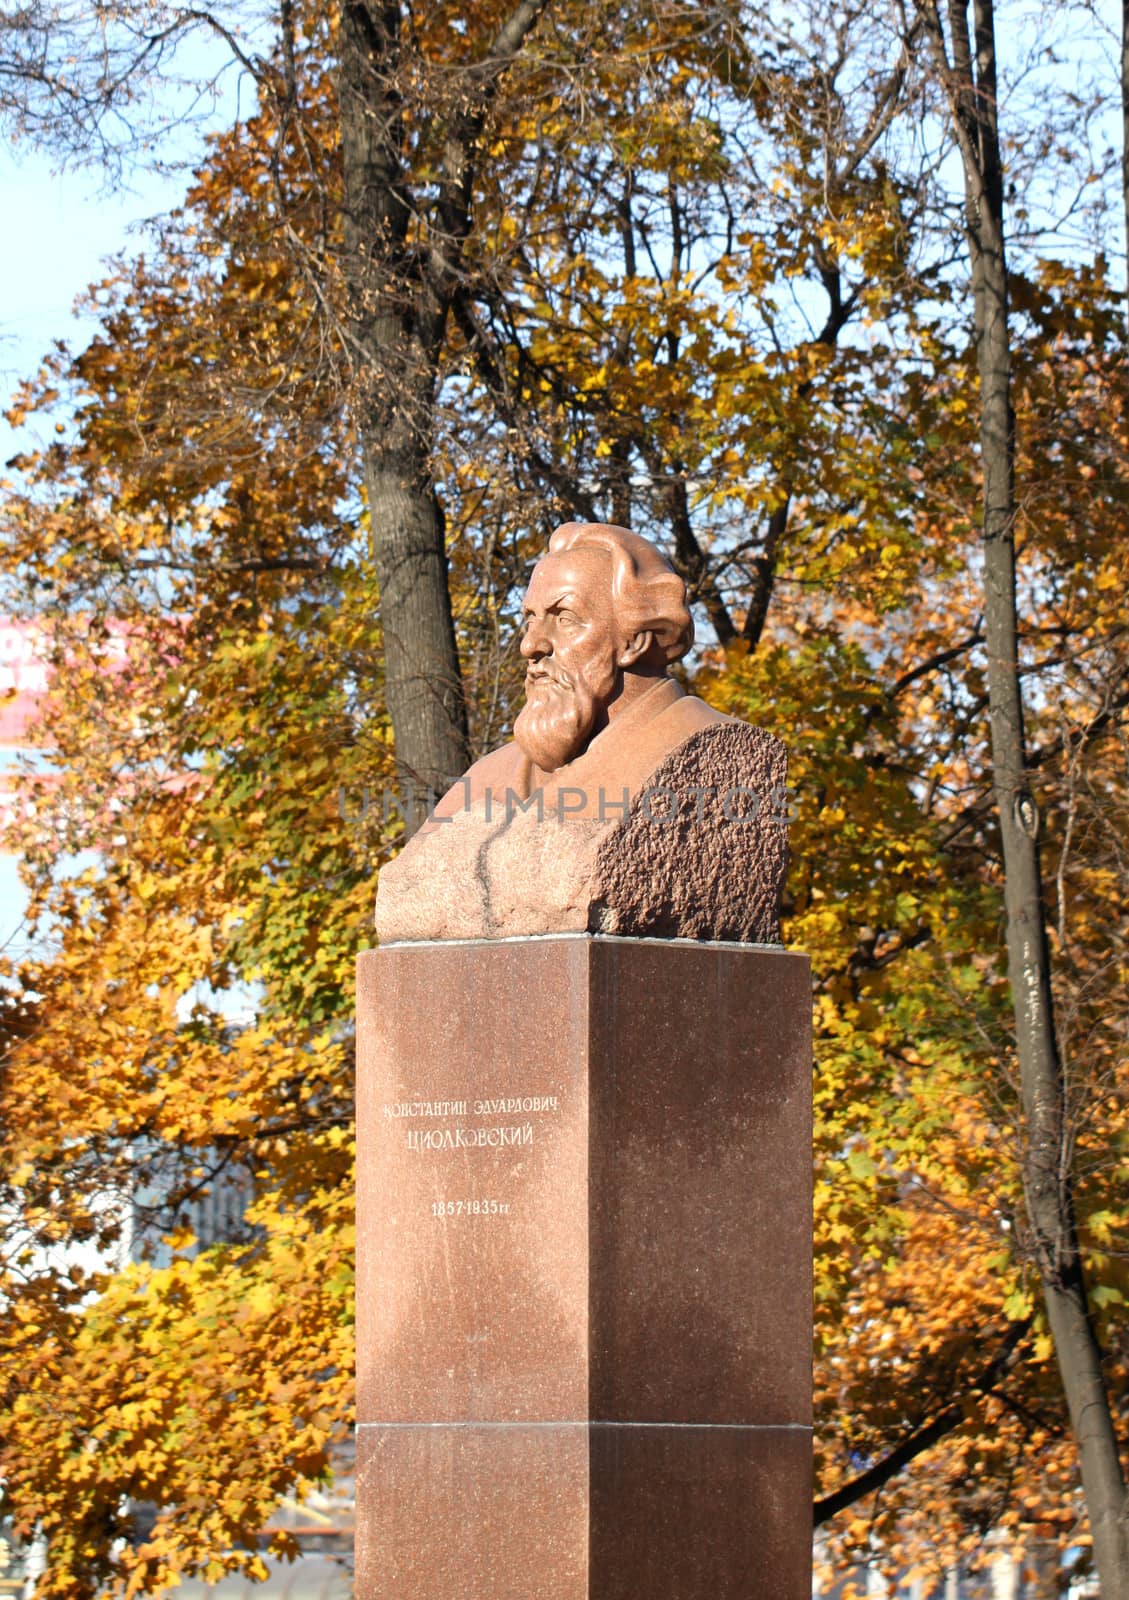 Tsiolkovsky Monument in Moscow